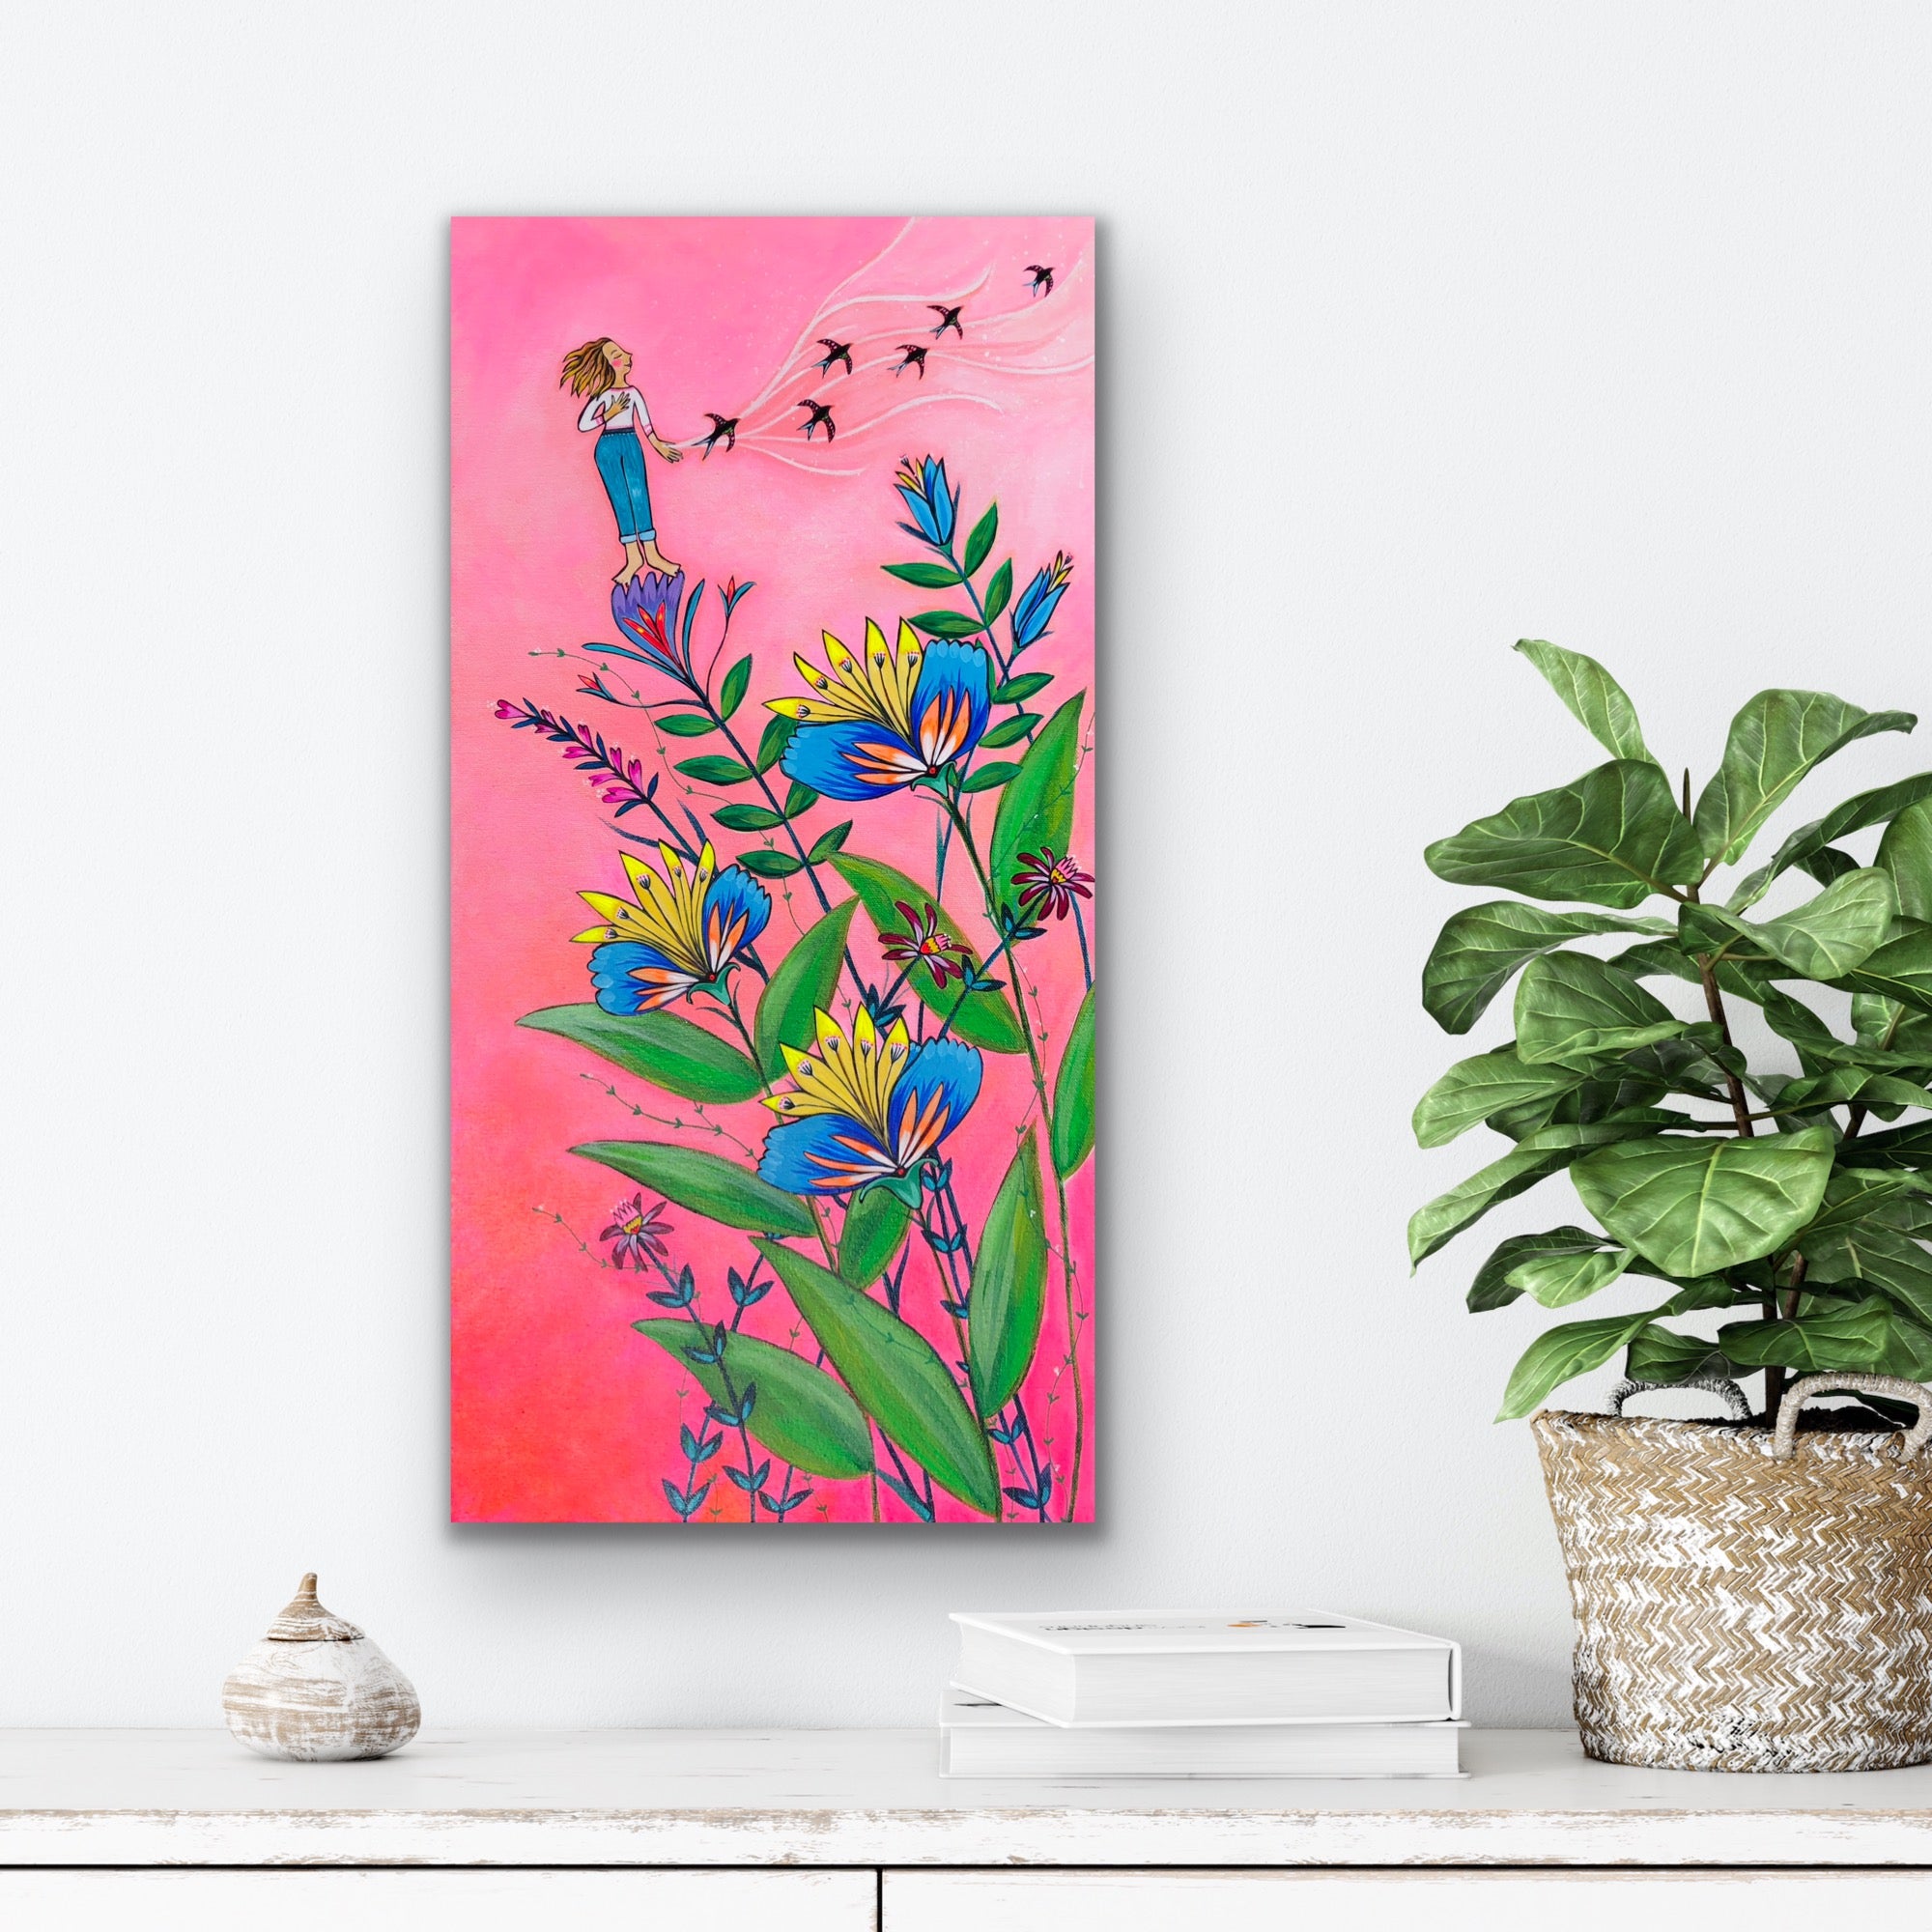 The Beauty of Letting Go (12x24)